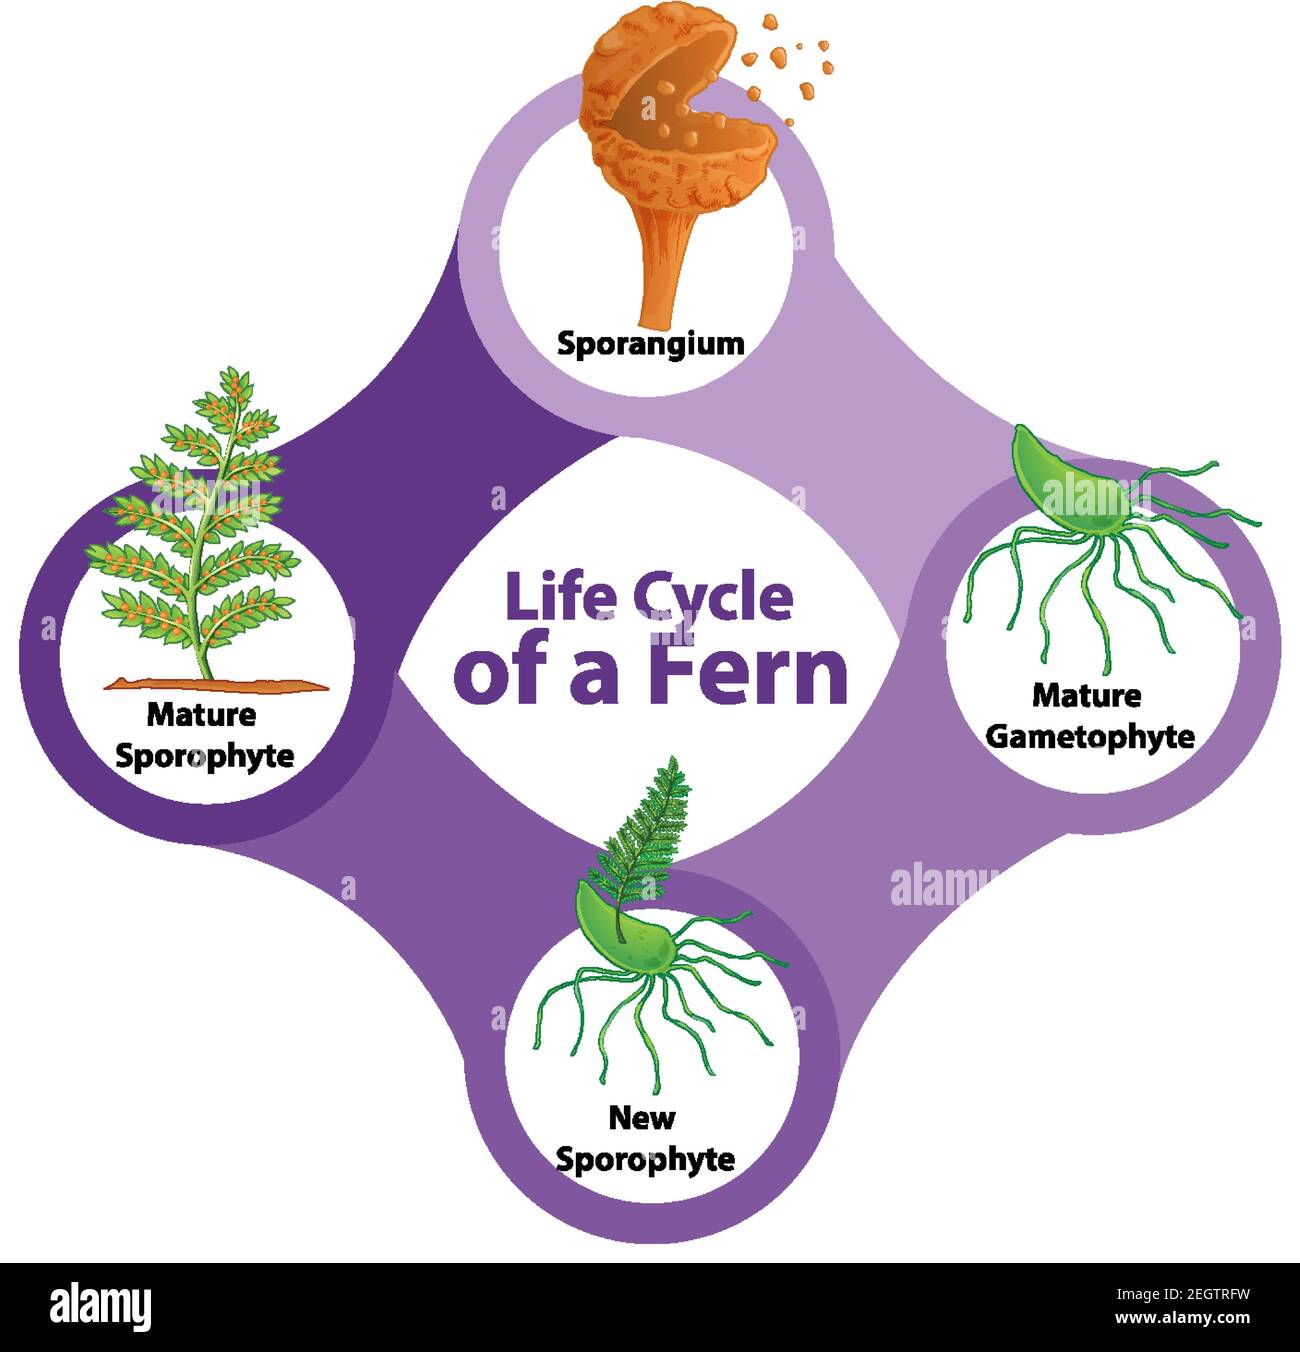 Life Cycle of a Fern Diagram illustration Stock Vector